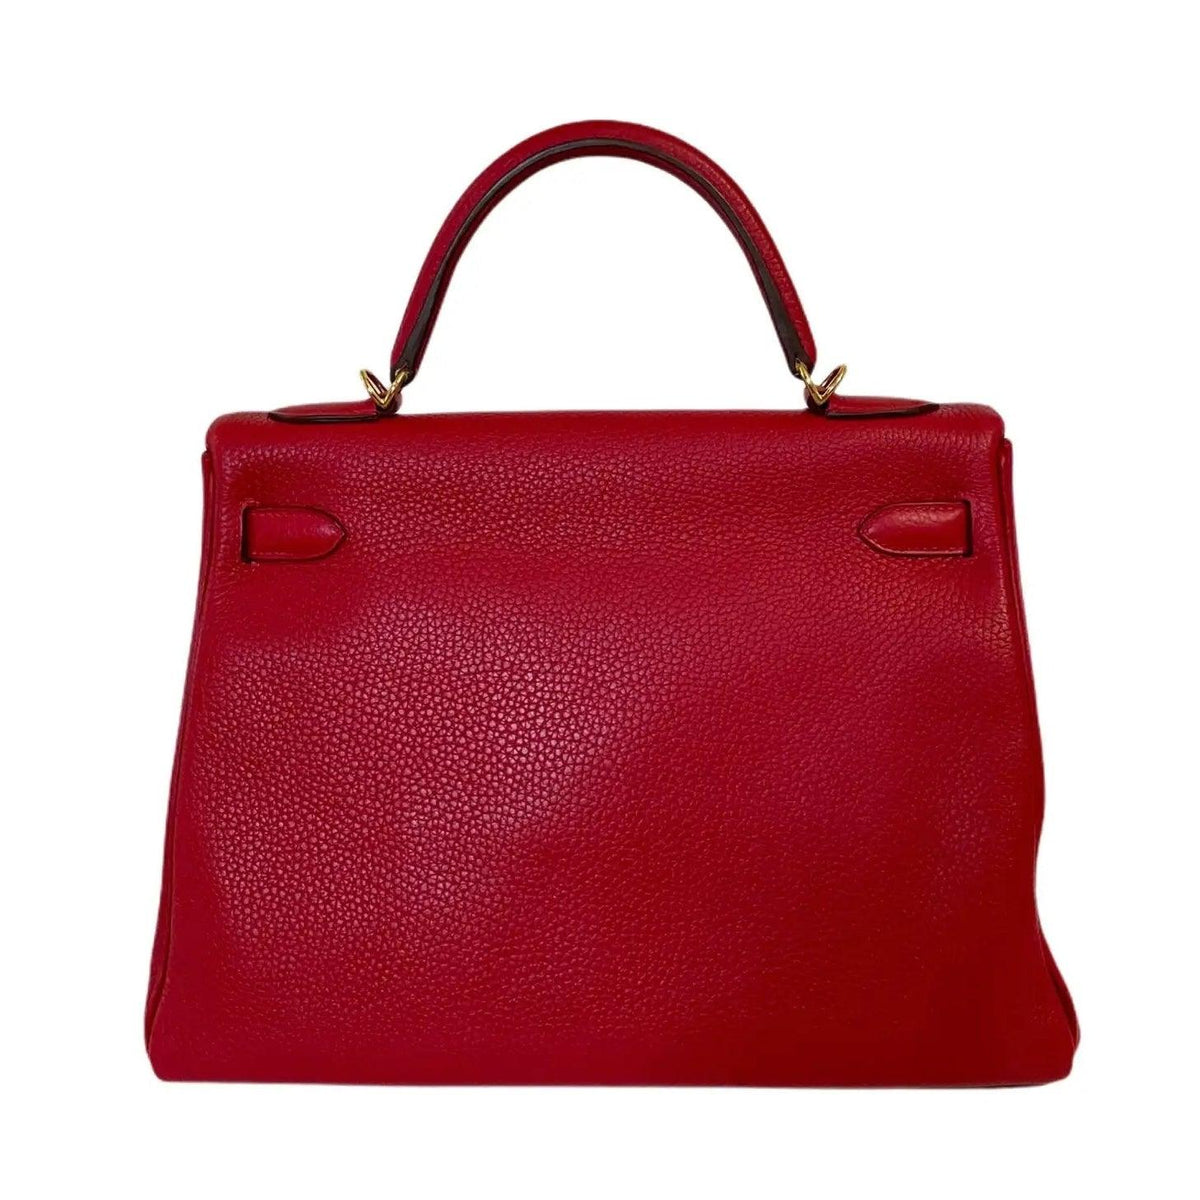 Pre-owned HERMES Kelly 32 Rogue Casaque Red Bag - theREMODA